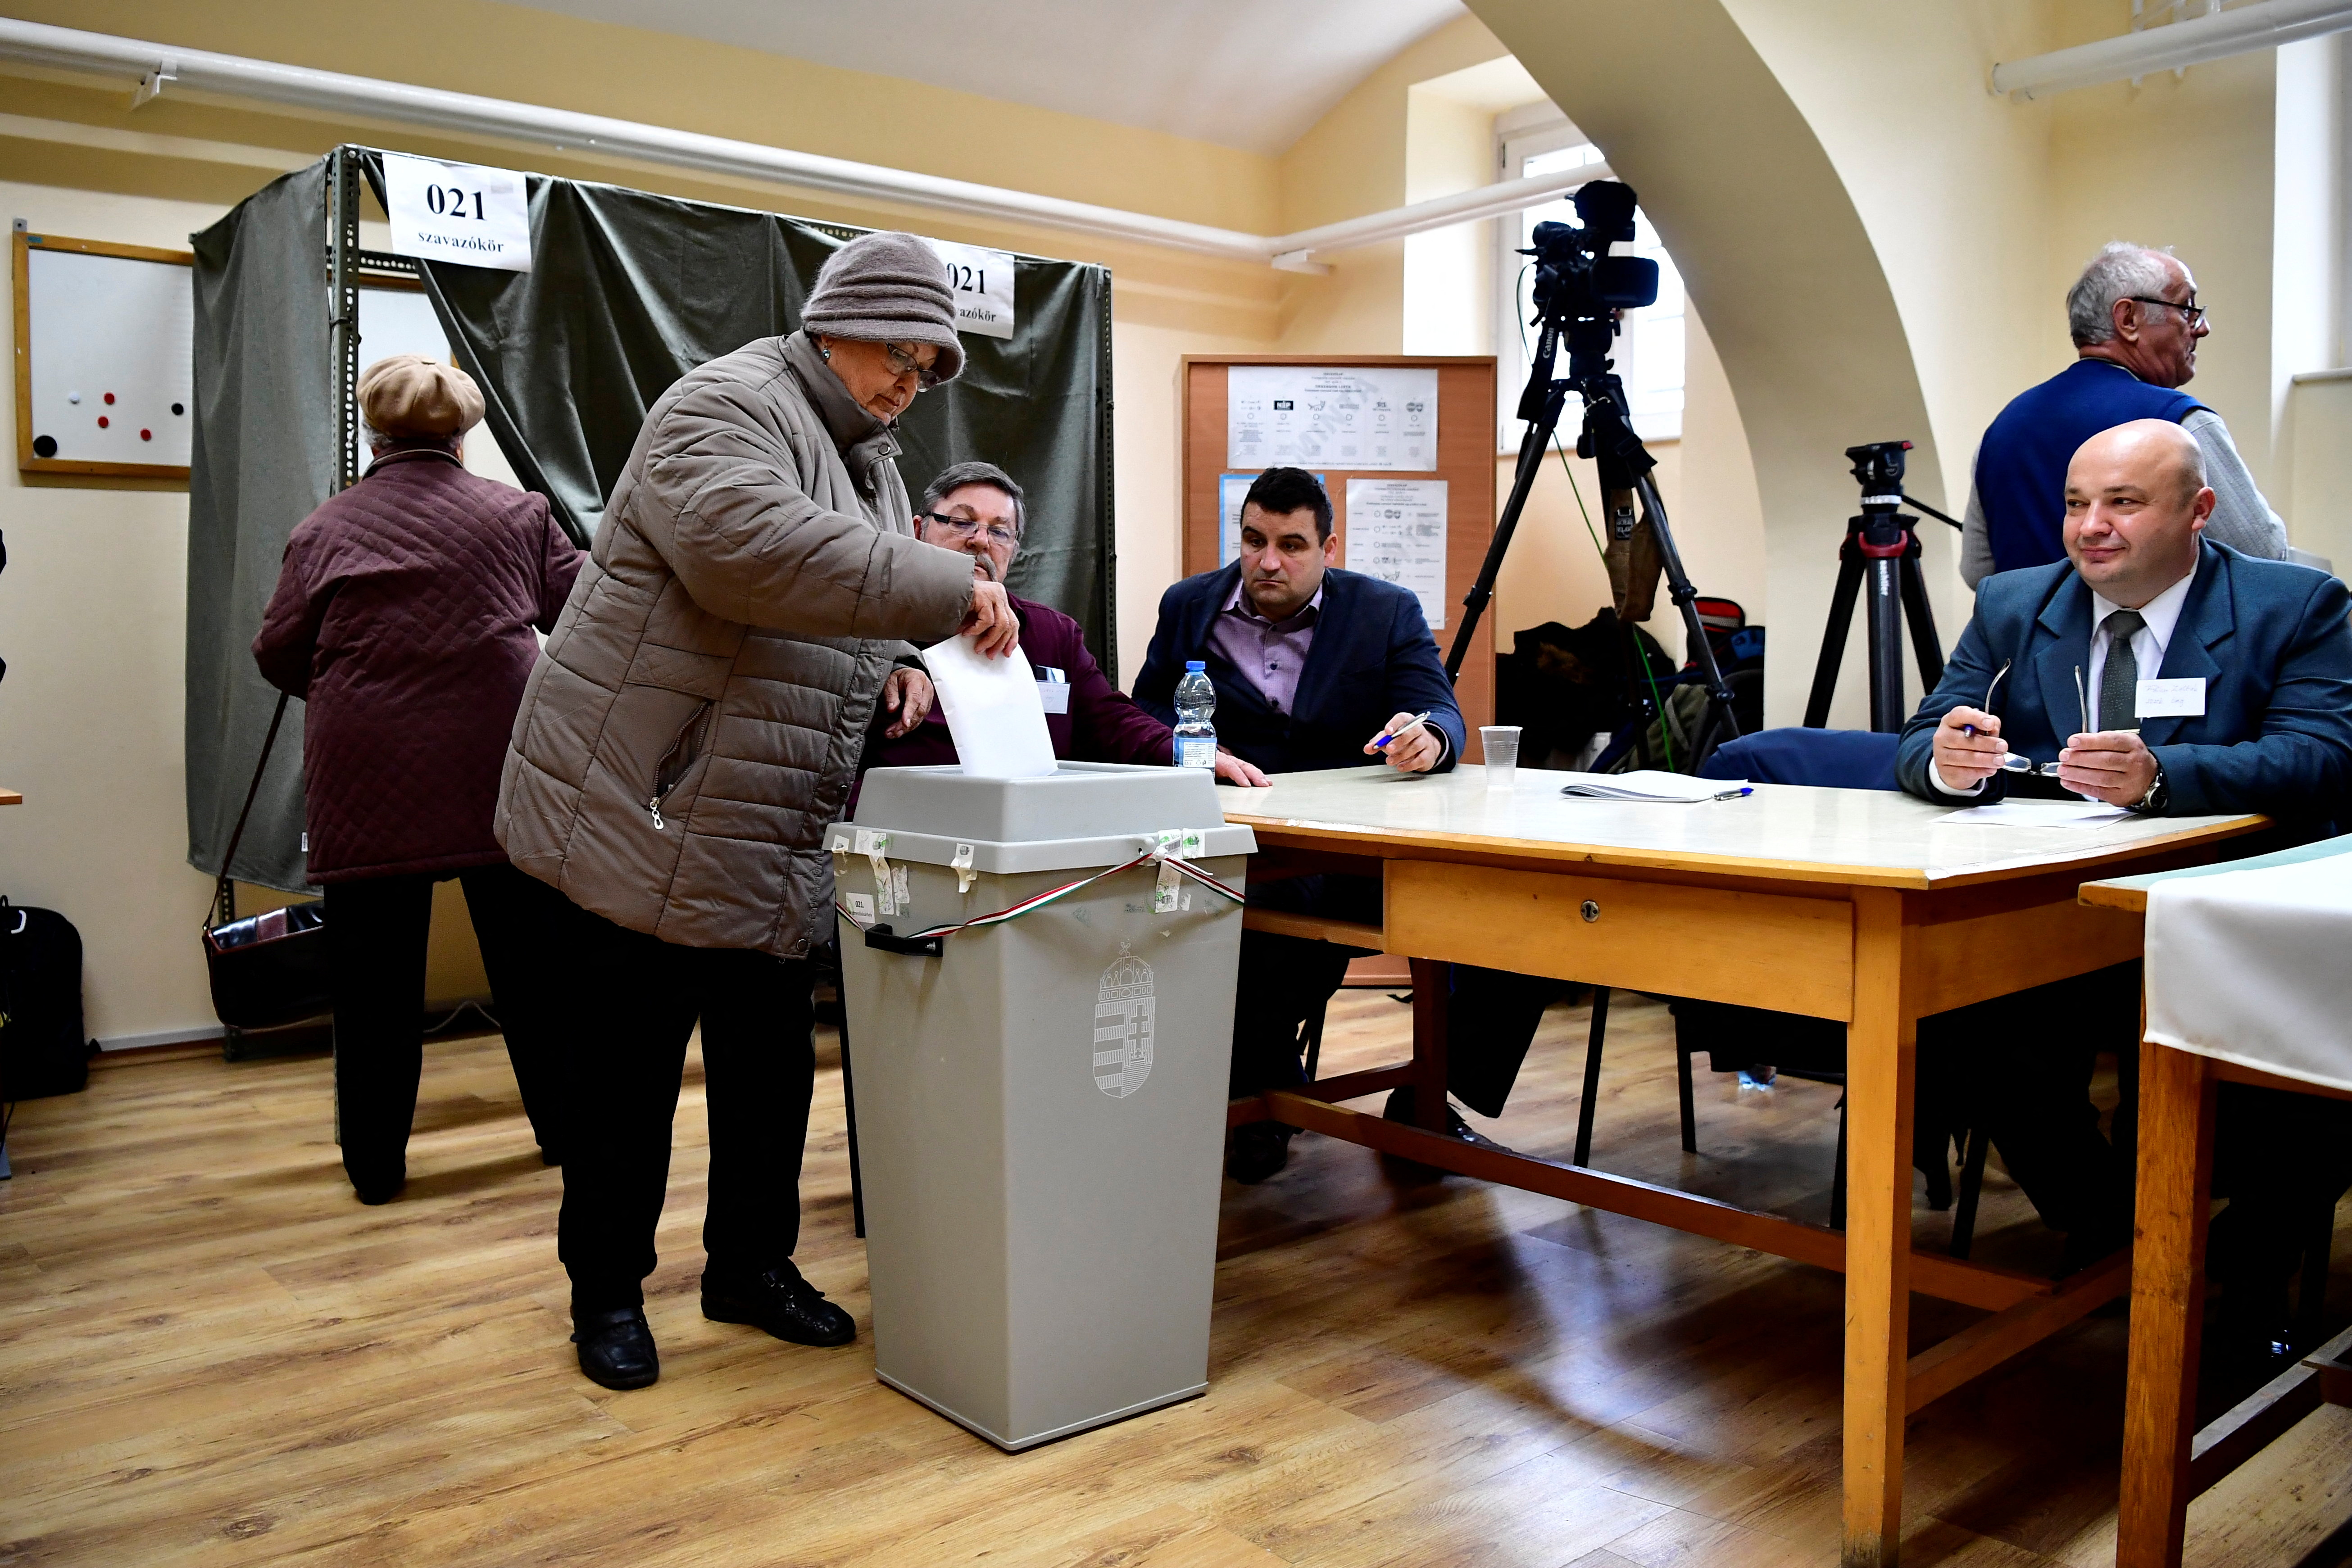 Hungary holds general election